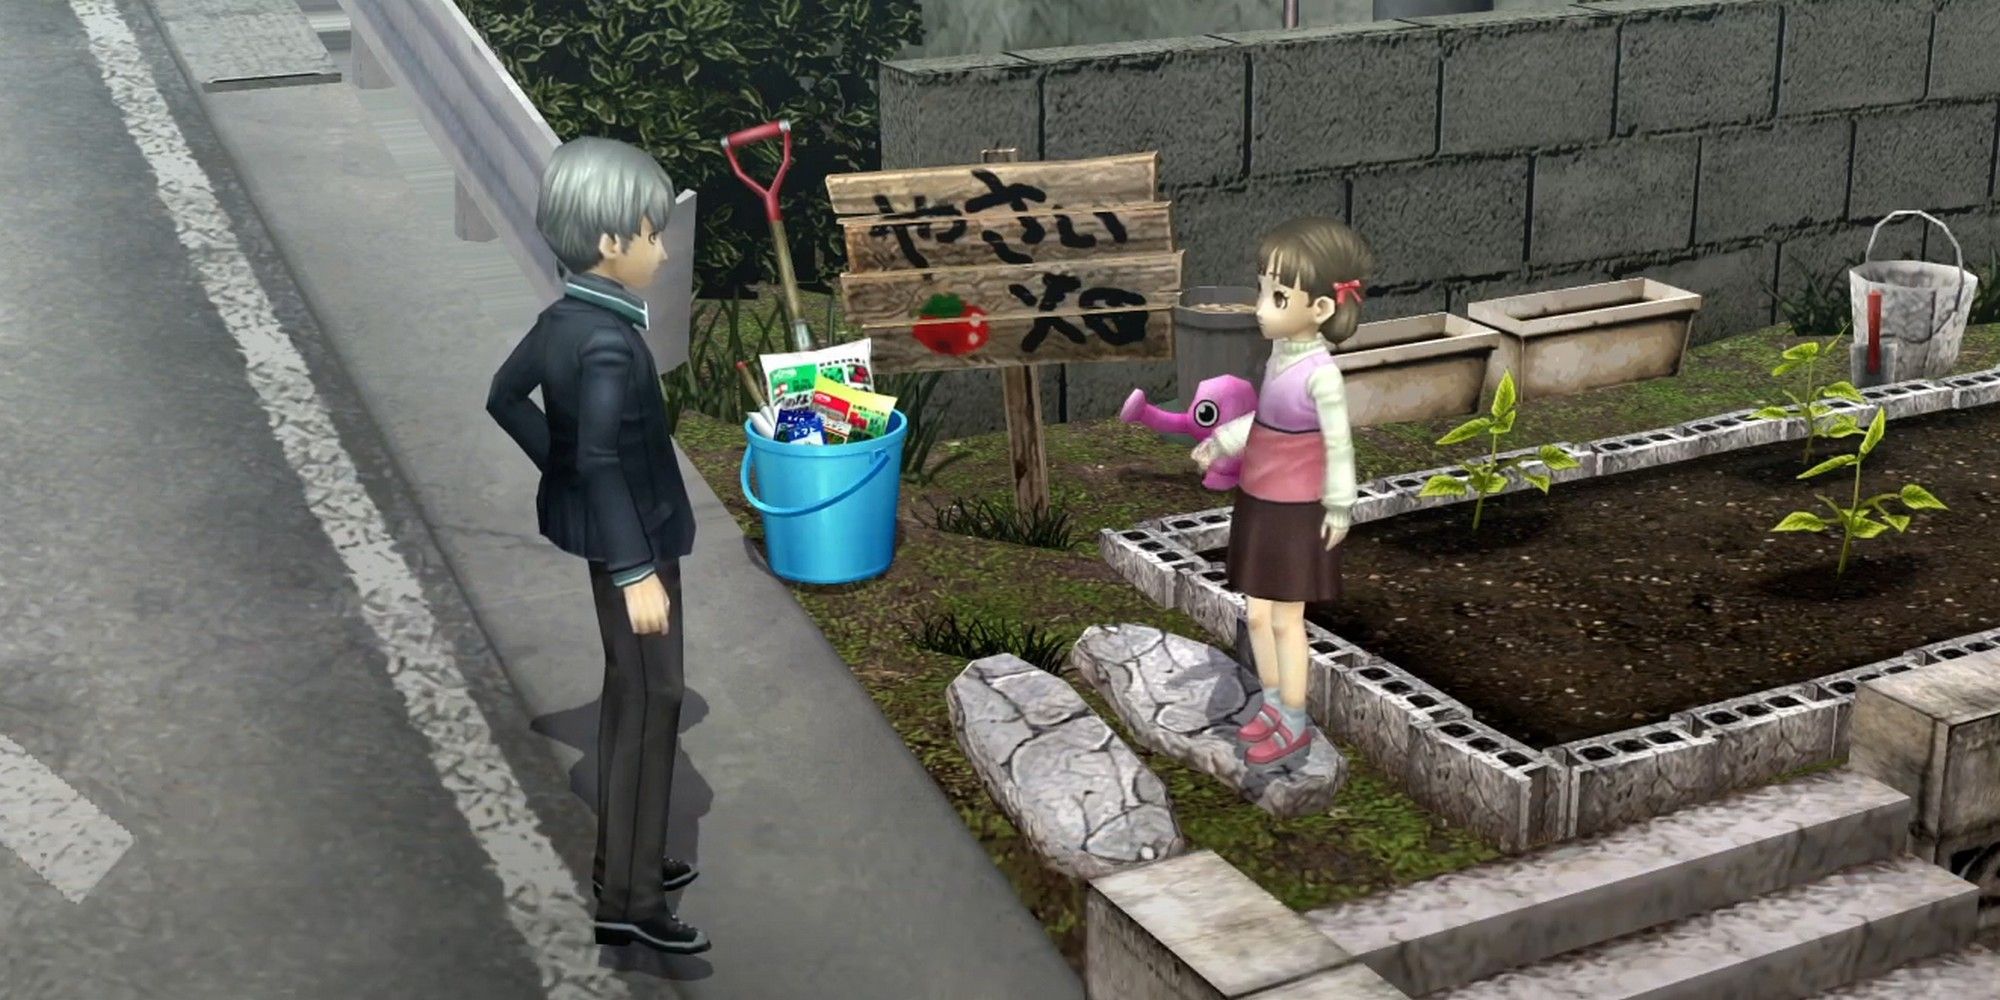 Yu and Nanako in front of their tomato plants in the garden in Persona 4 Golden